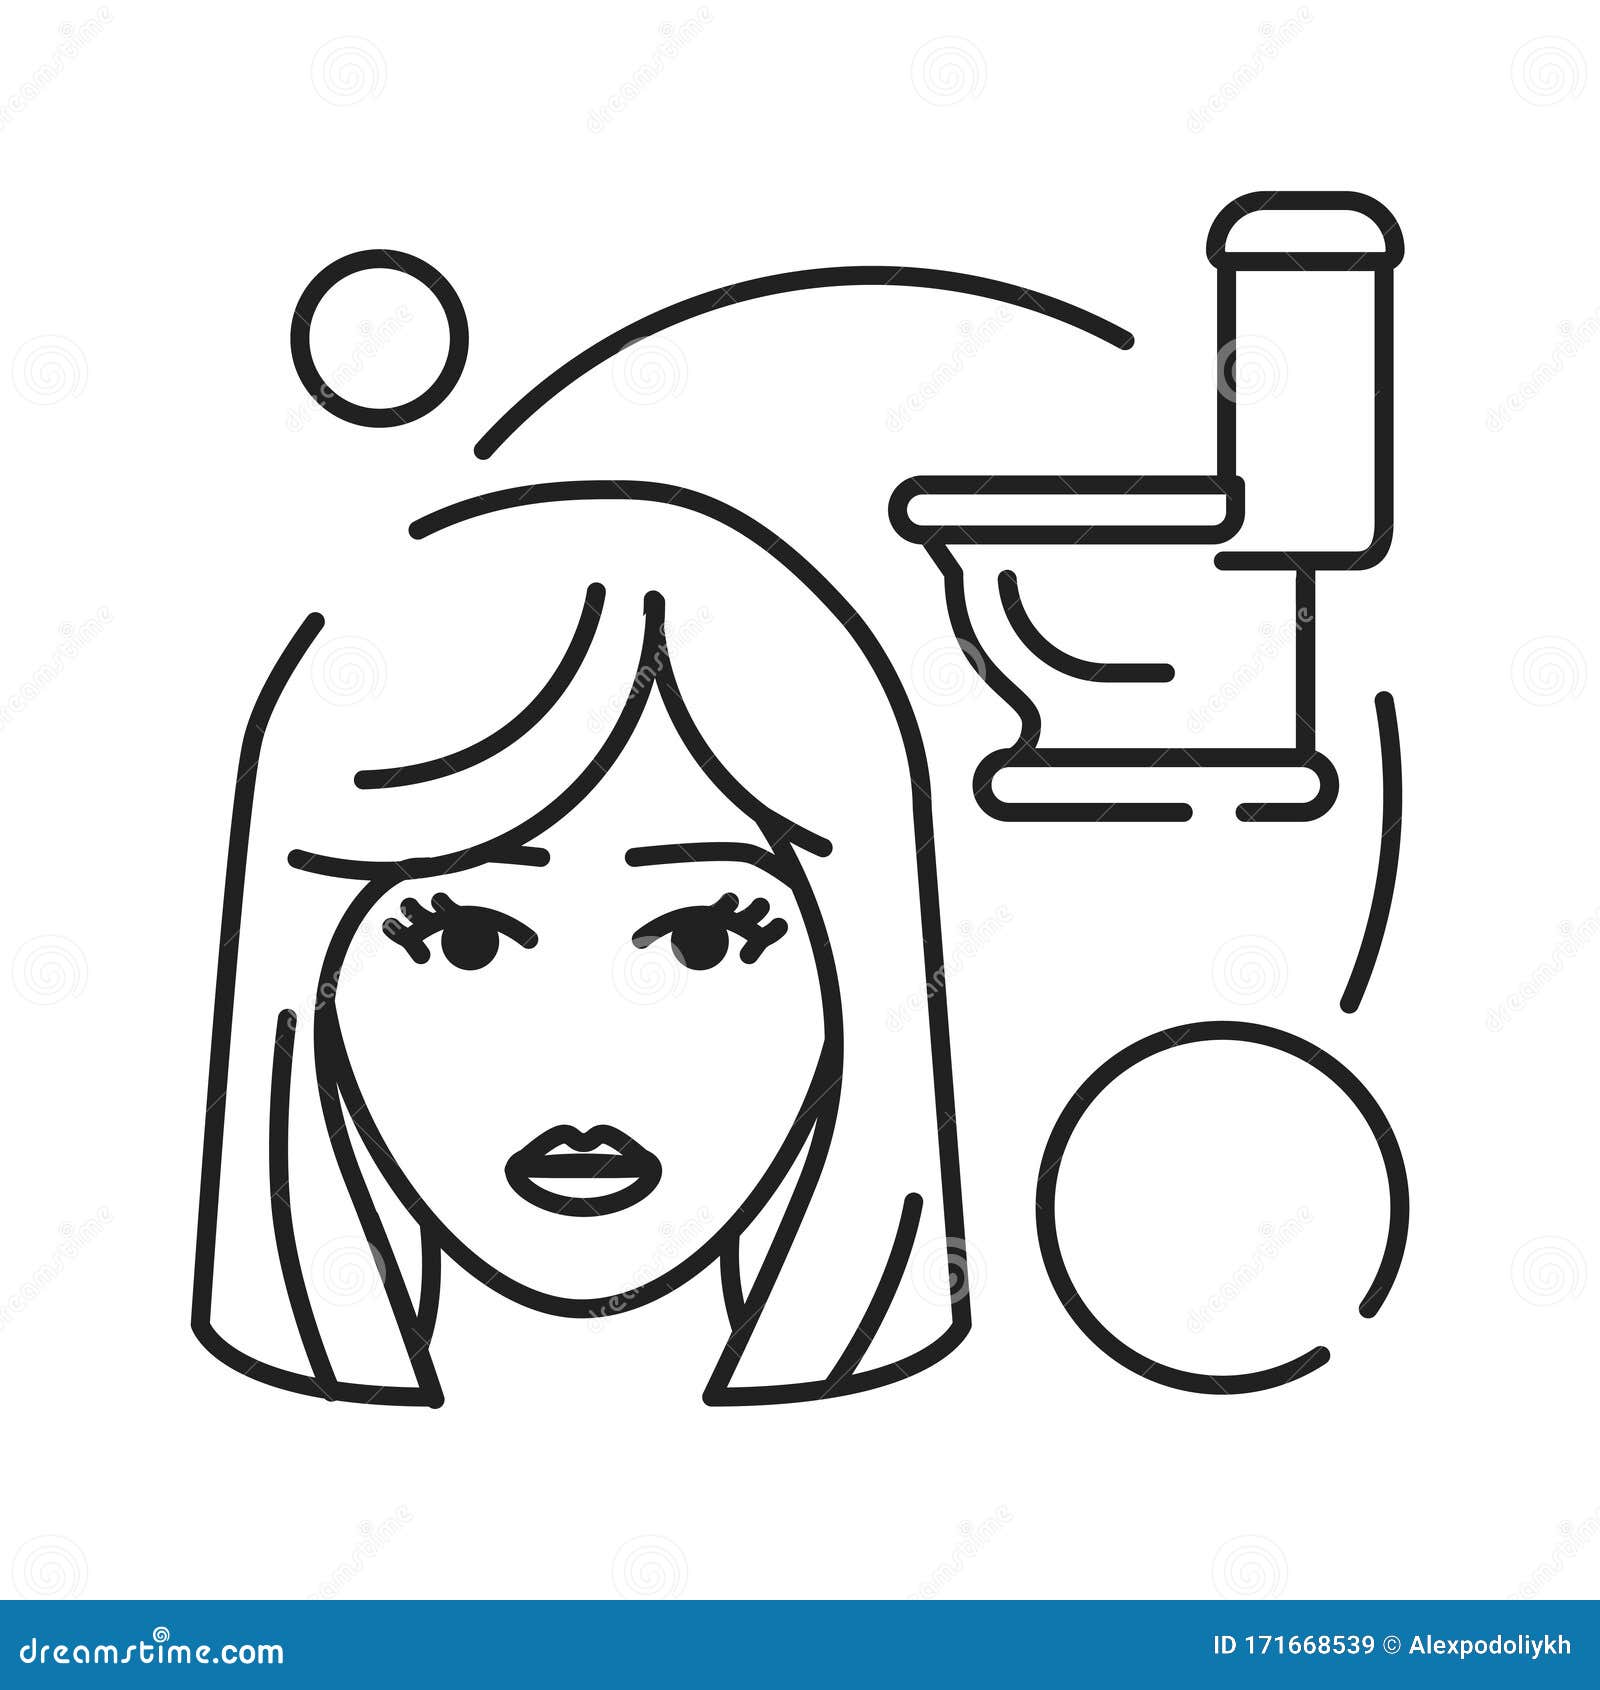 Early Pregnancy Symptoms Frequent Urination Black Line Icon. Pregnant Blond  Woman Concept Stock Illustration - Illustration of frequent, concept:  171668539